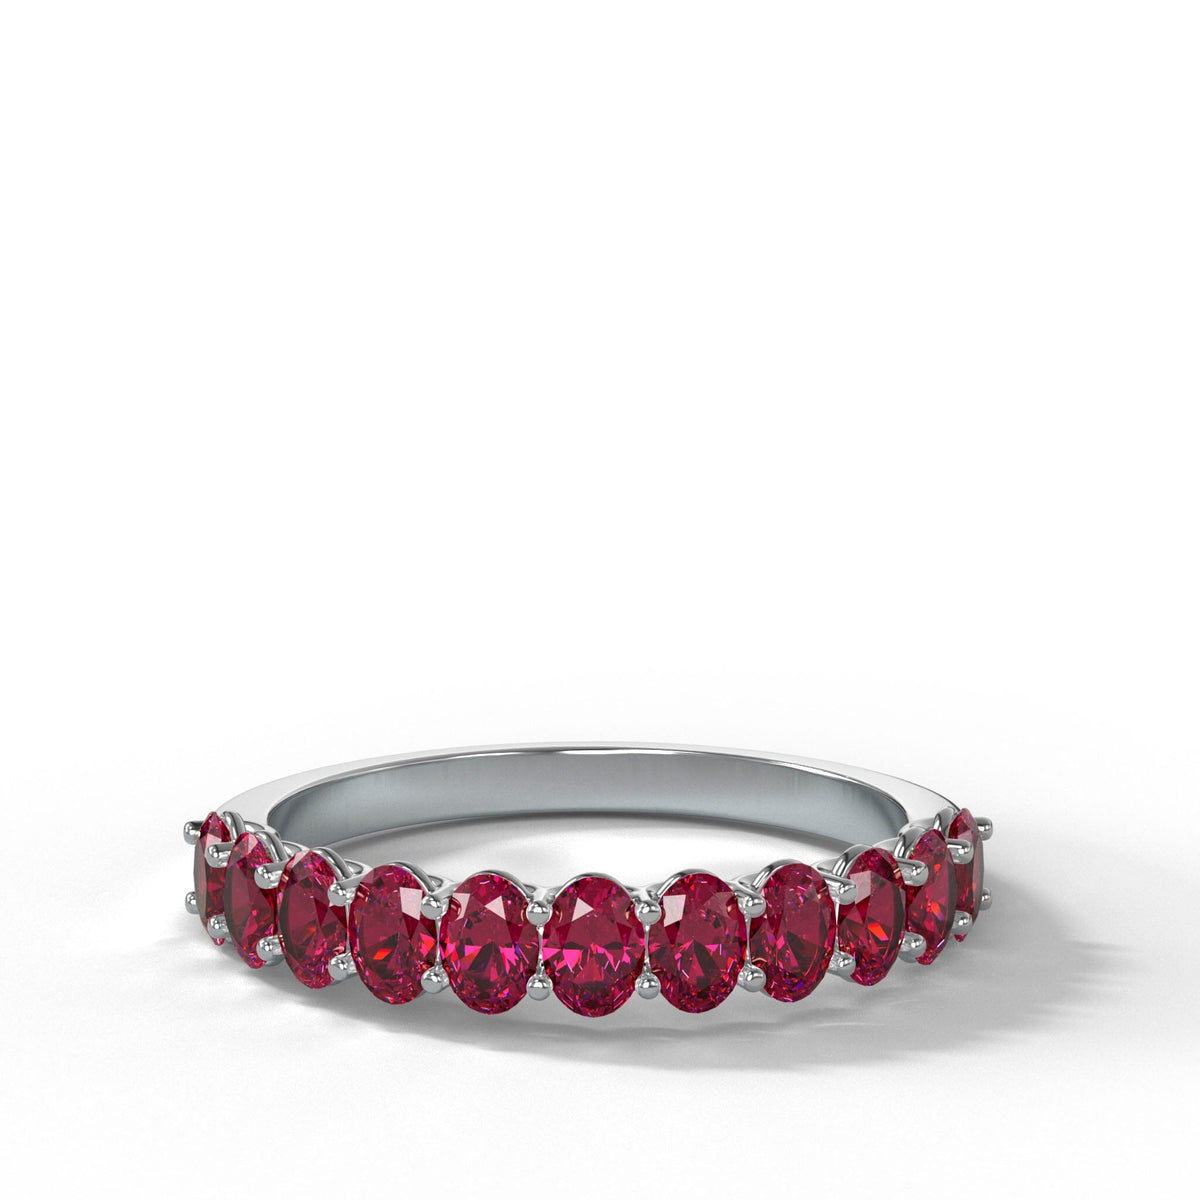 Petite Shared Prong Wedding Band with Red Oval Rubies Band Good Stone Inc White Gold 14k Natural